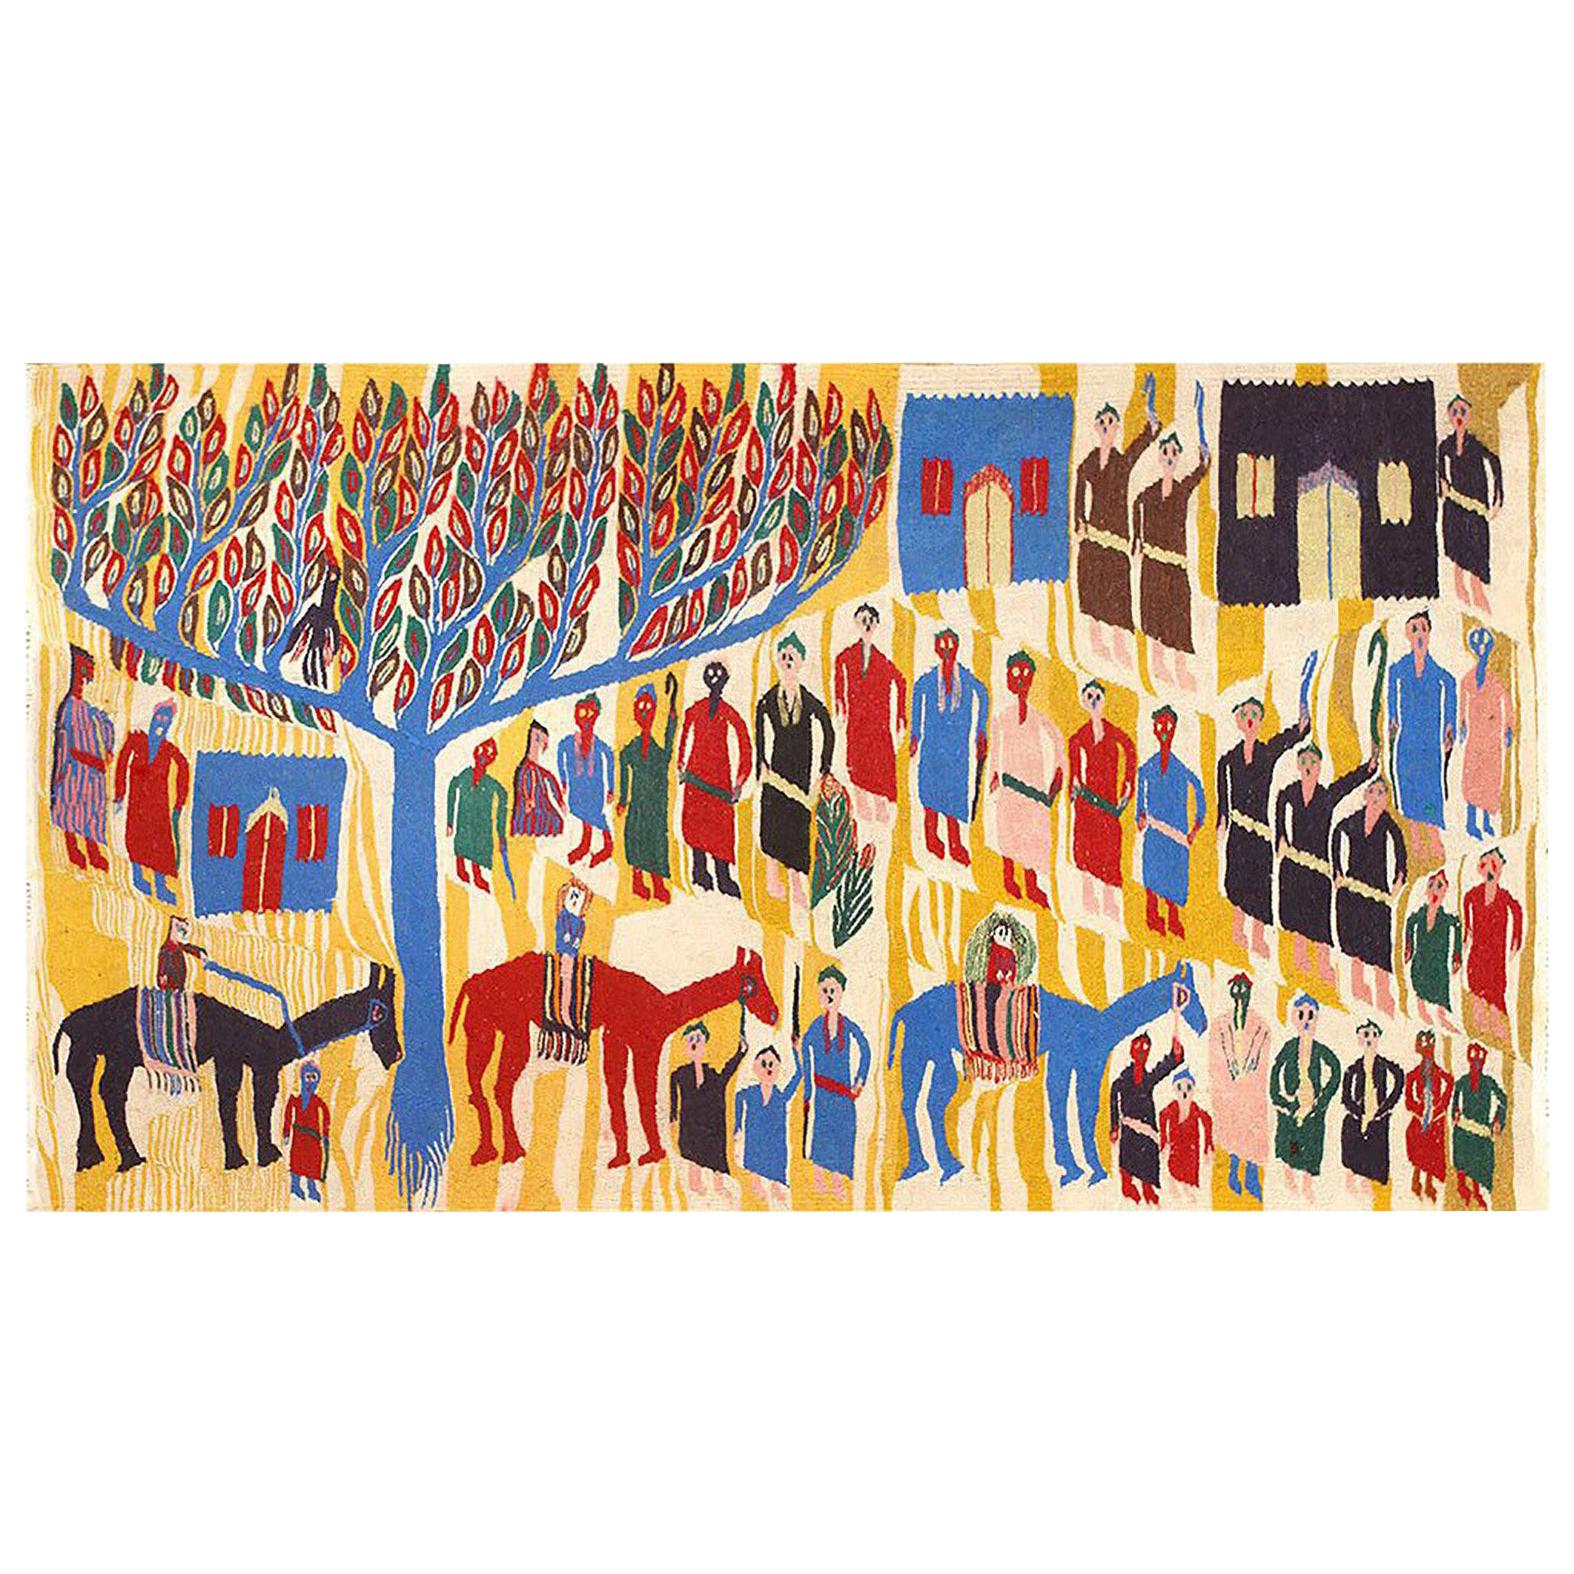 Vintage Judaic Purim Scene Tapestry. Size: 6 ft x 3 ft 9 in 